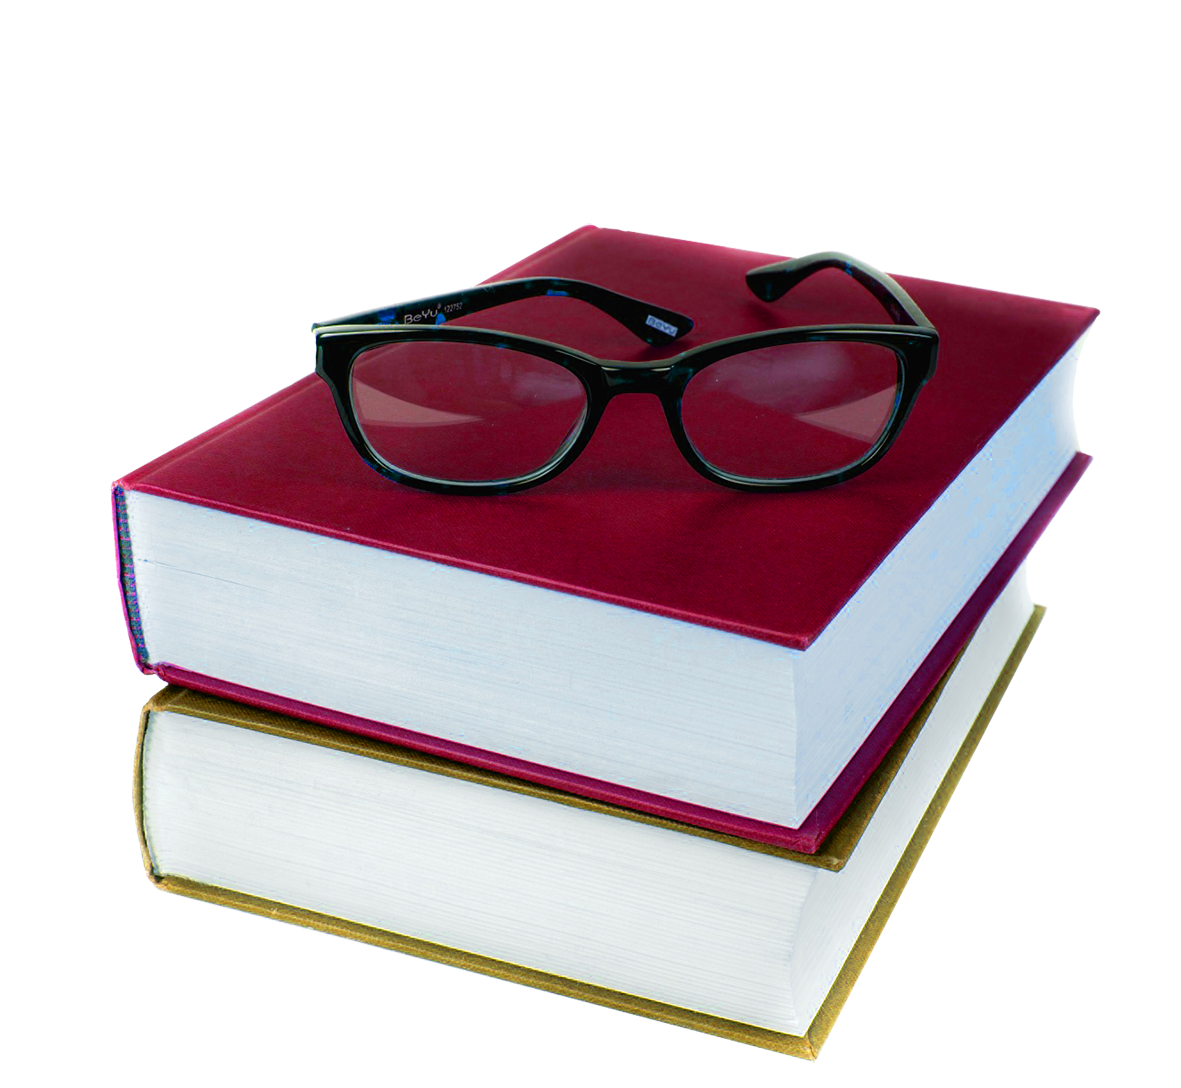 books in red-and green and glasses clipart